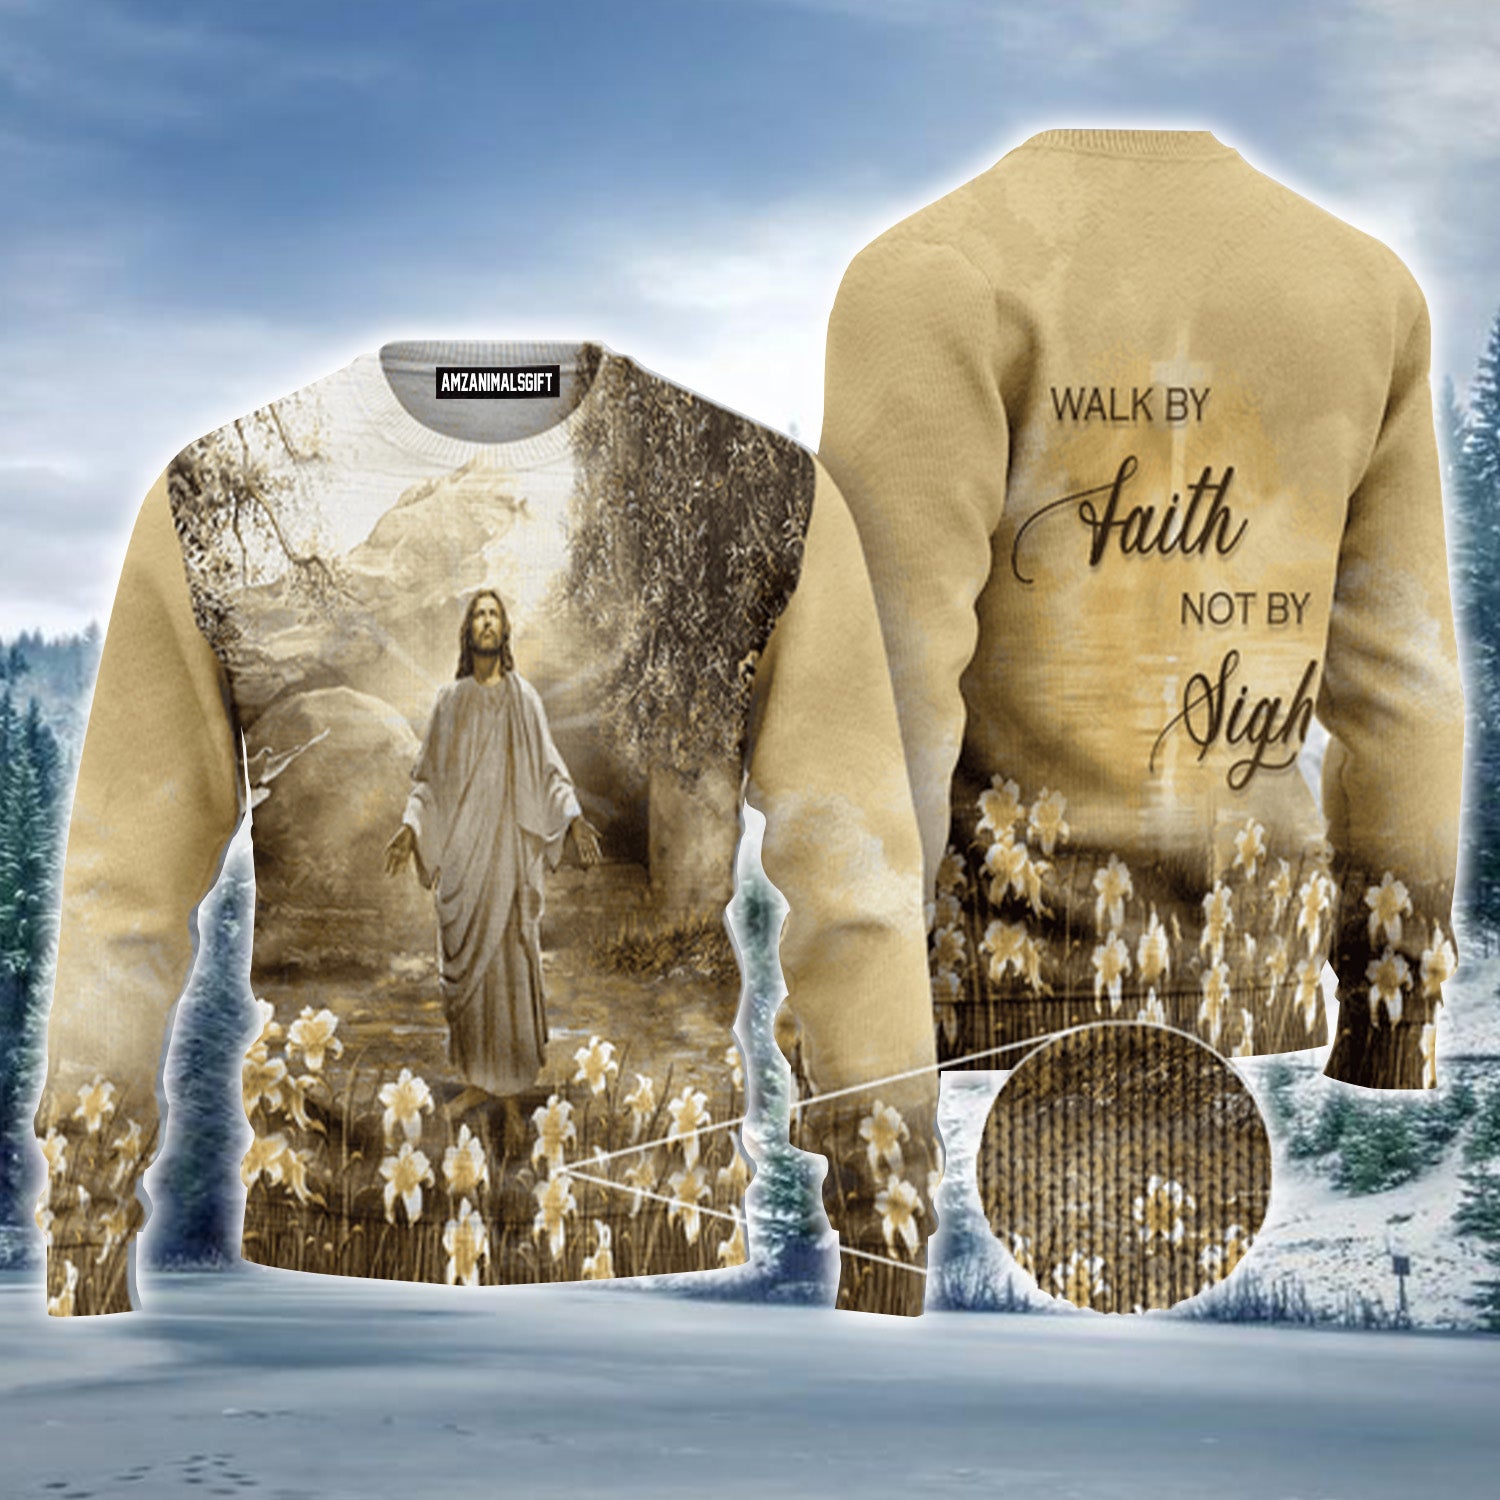 Cross Jesus Flower Walk By Faith Not By Sight Urly Sweater, Christmas Sweater For Men & Women - Perfect Gift For New Year, Winter, Christmas